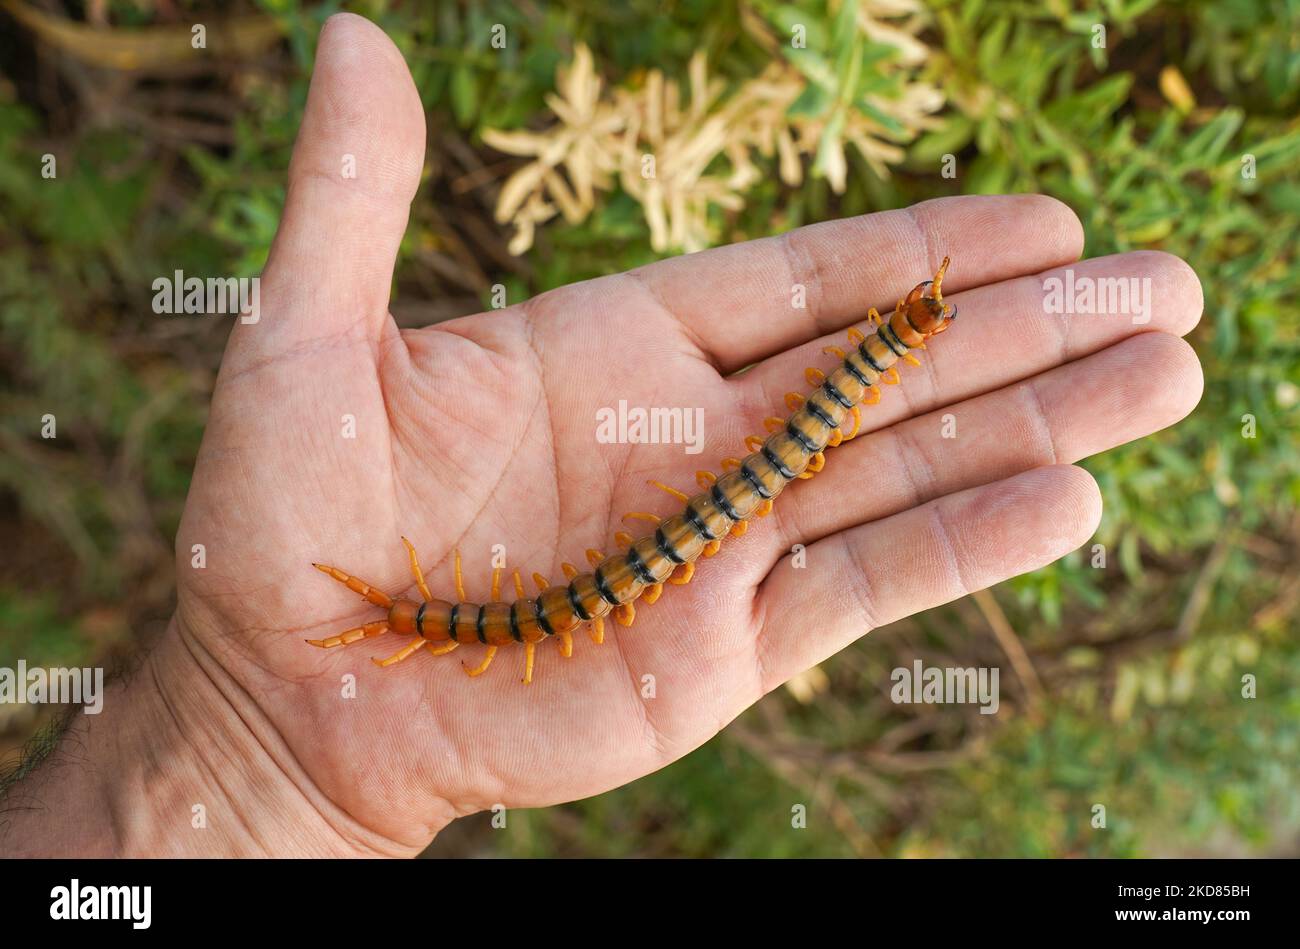 Megarian banded centipede, Escolopendra in a hand, Centipede, Spain. Stock Photo